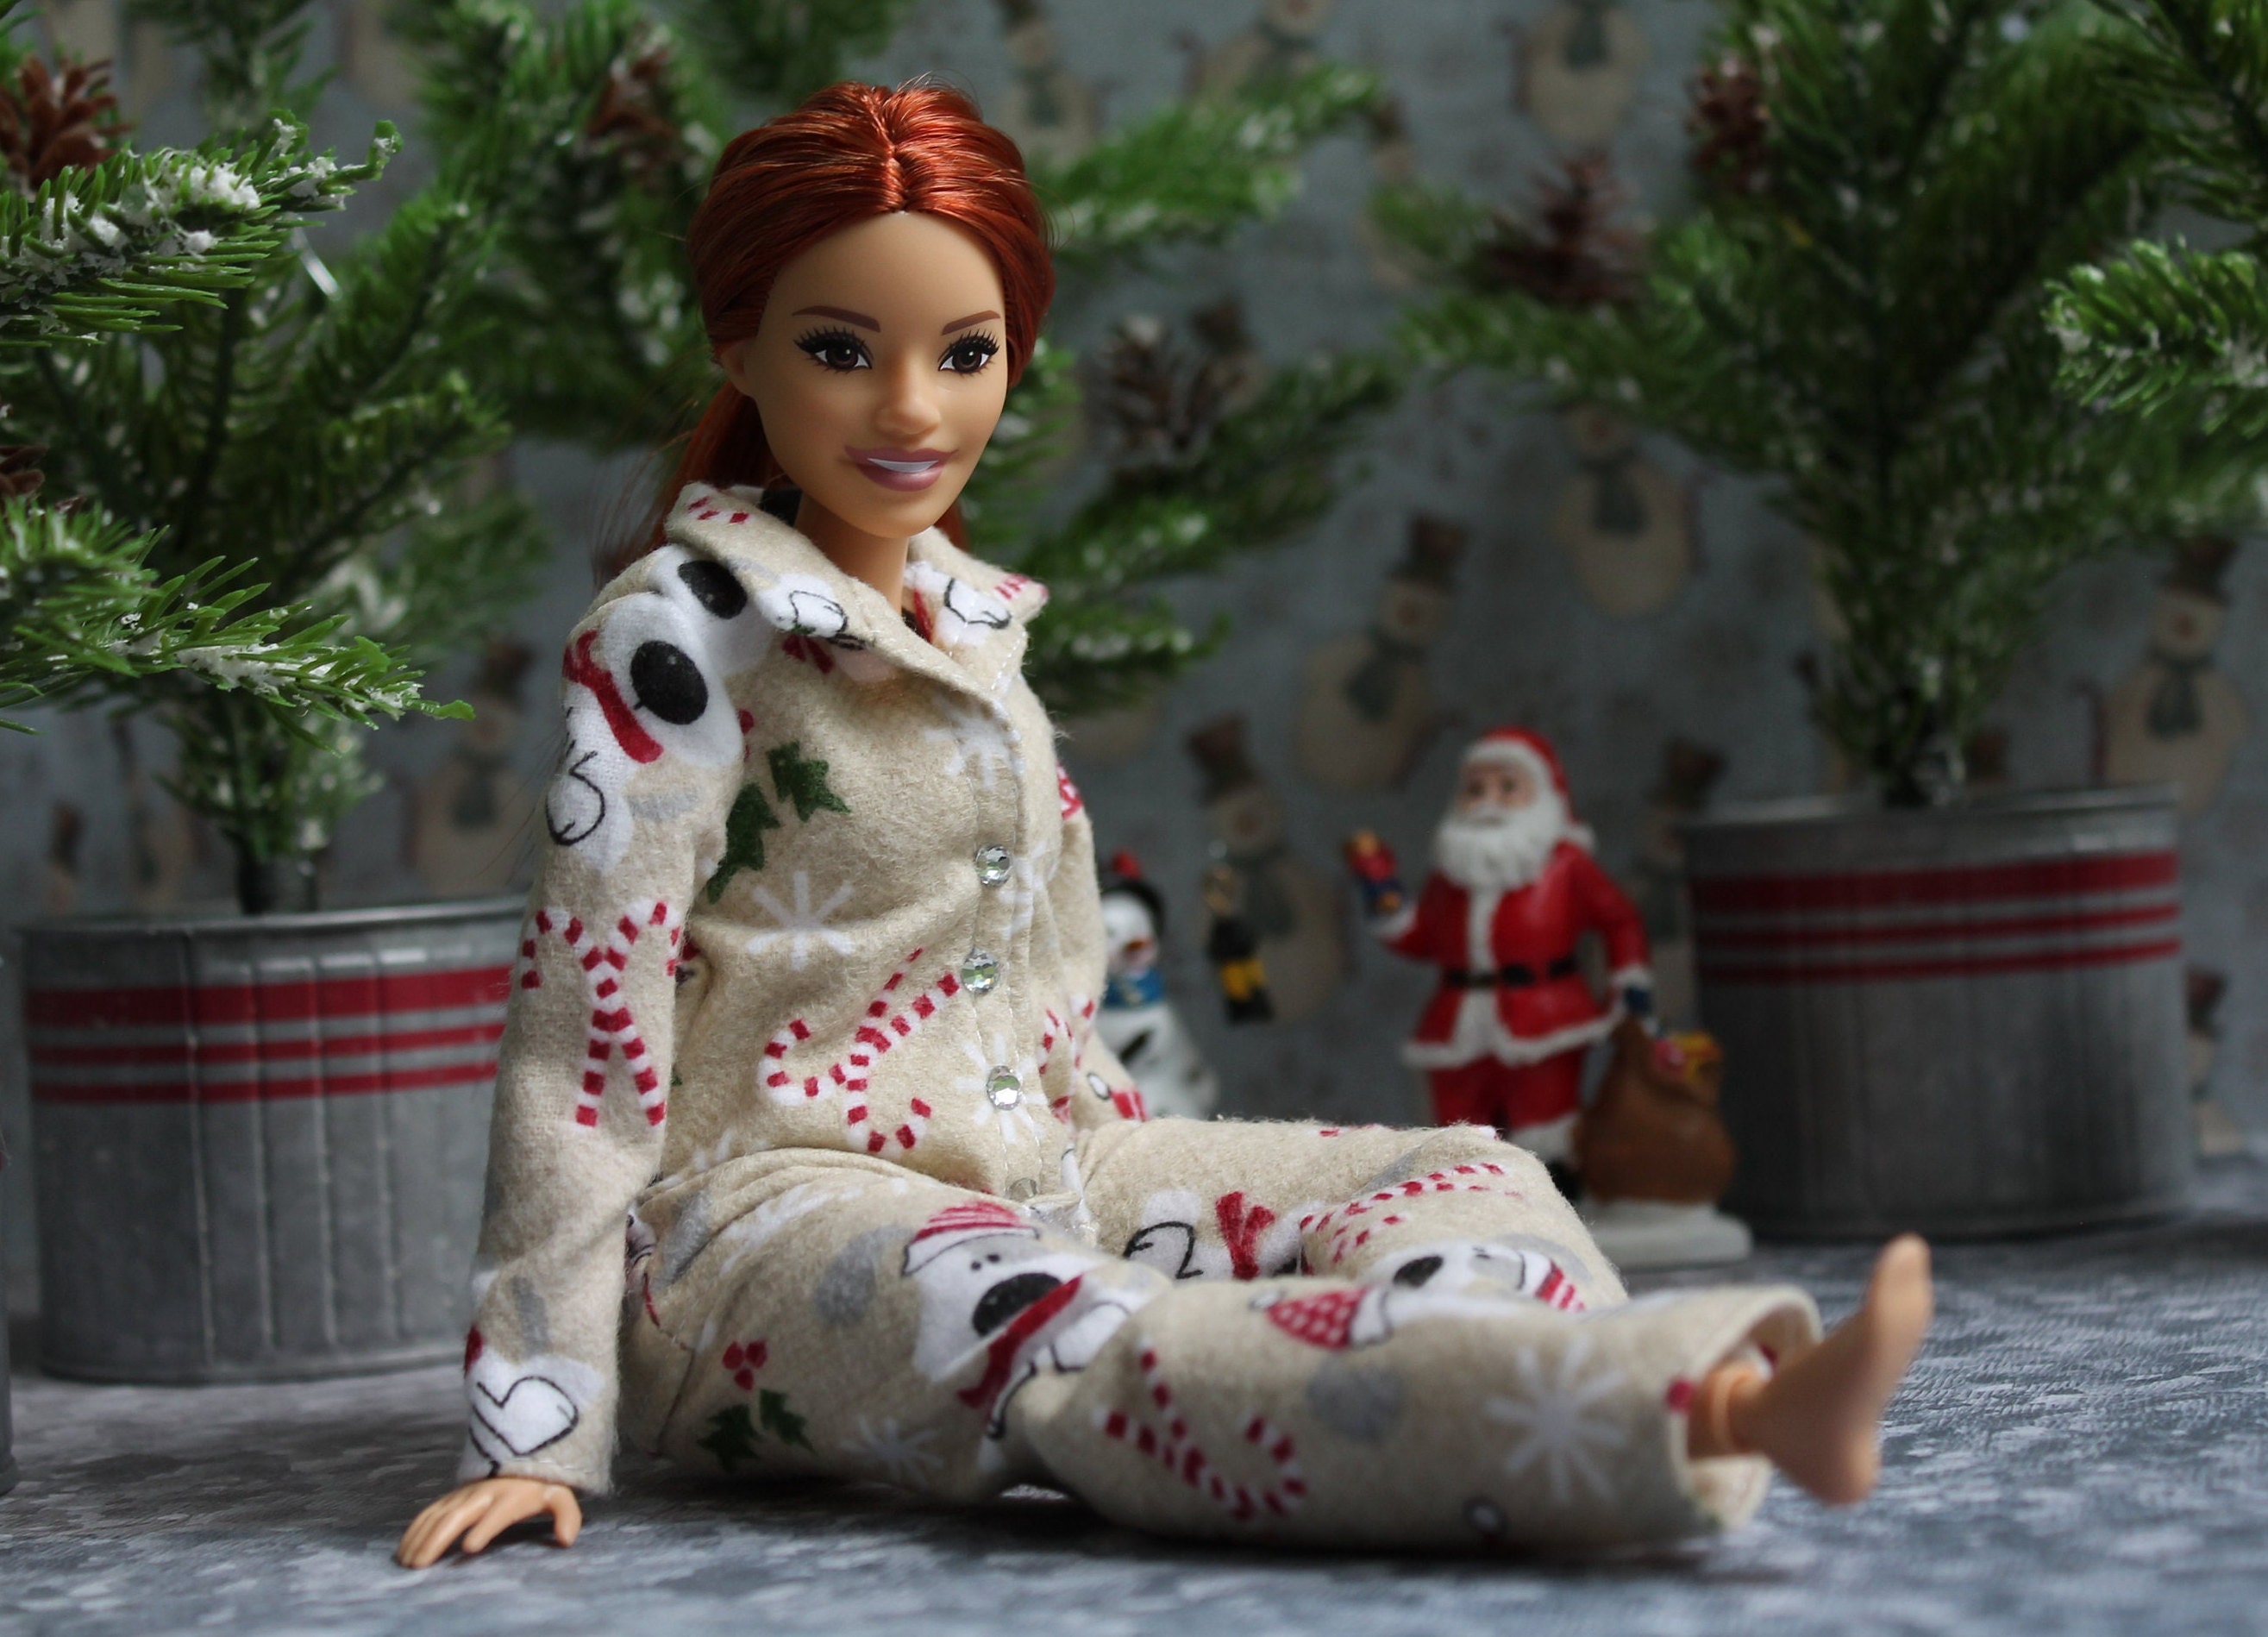 Flannel Pajamas for Dolls. №262 Clothes for Curvy Barbie Doll 